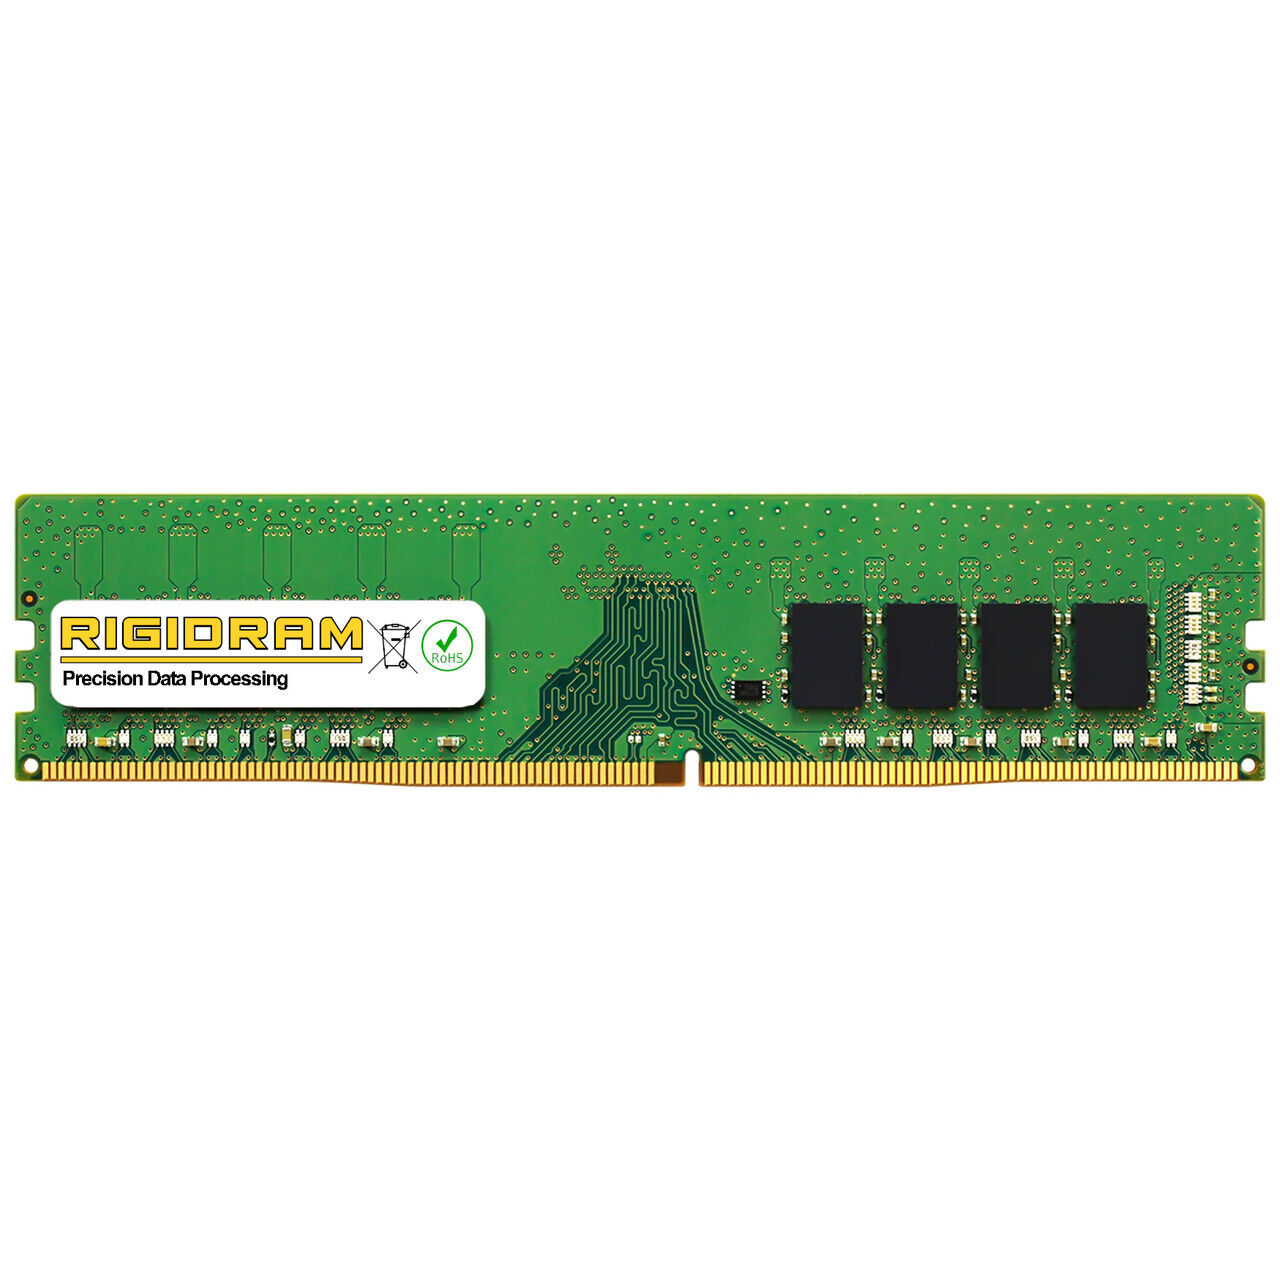 16GB RAM DDR4 UDIMM RAM Memory for HP ProDesk 600 G3 MT Micro Tower & SFF